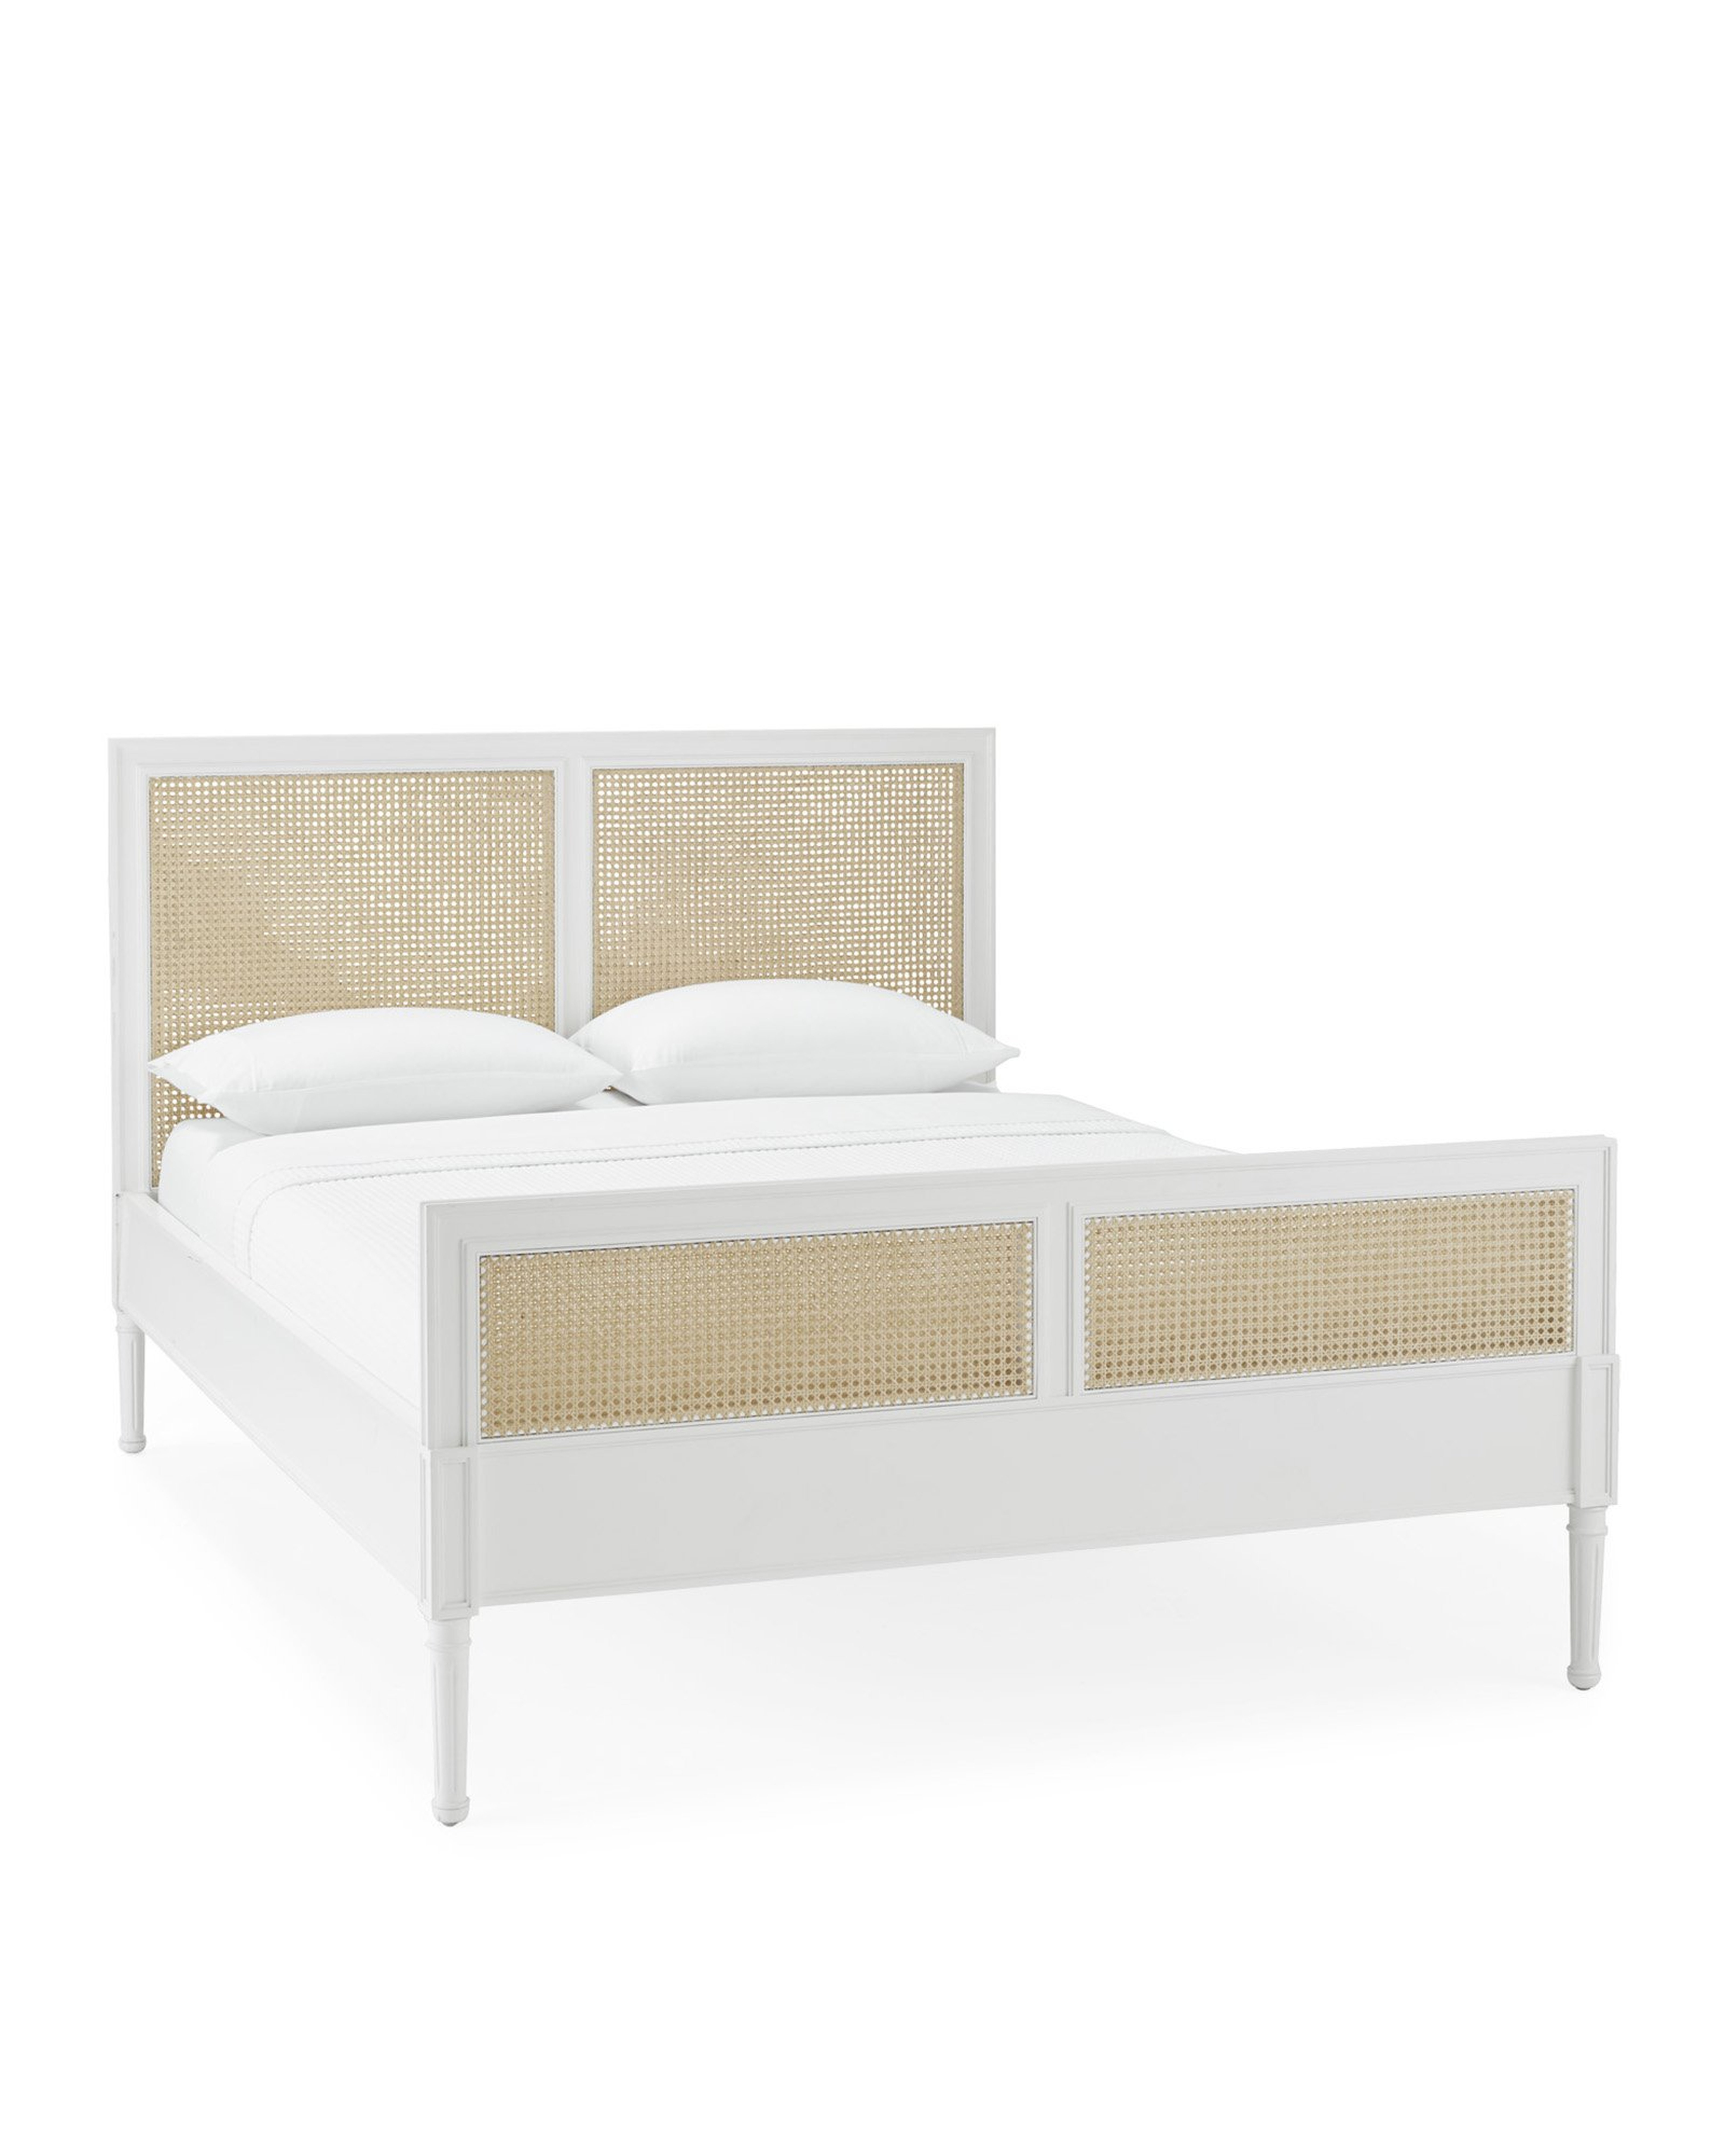 Harbour Cane Queen Bed - White - Serena and Lily